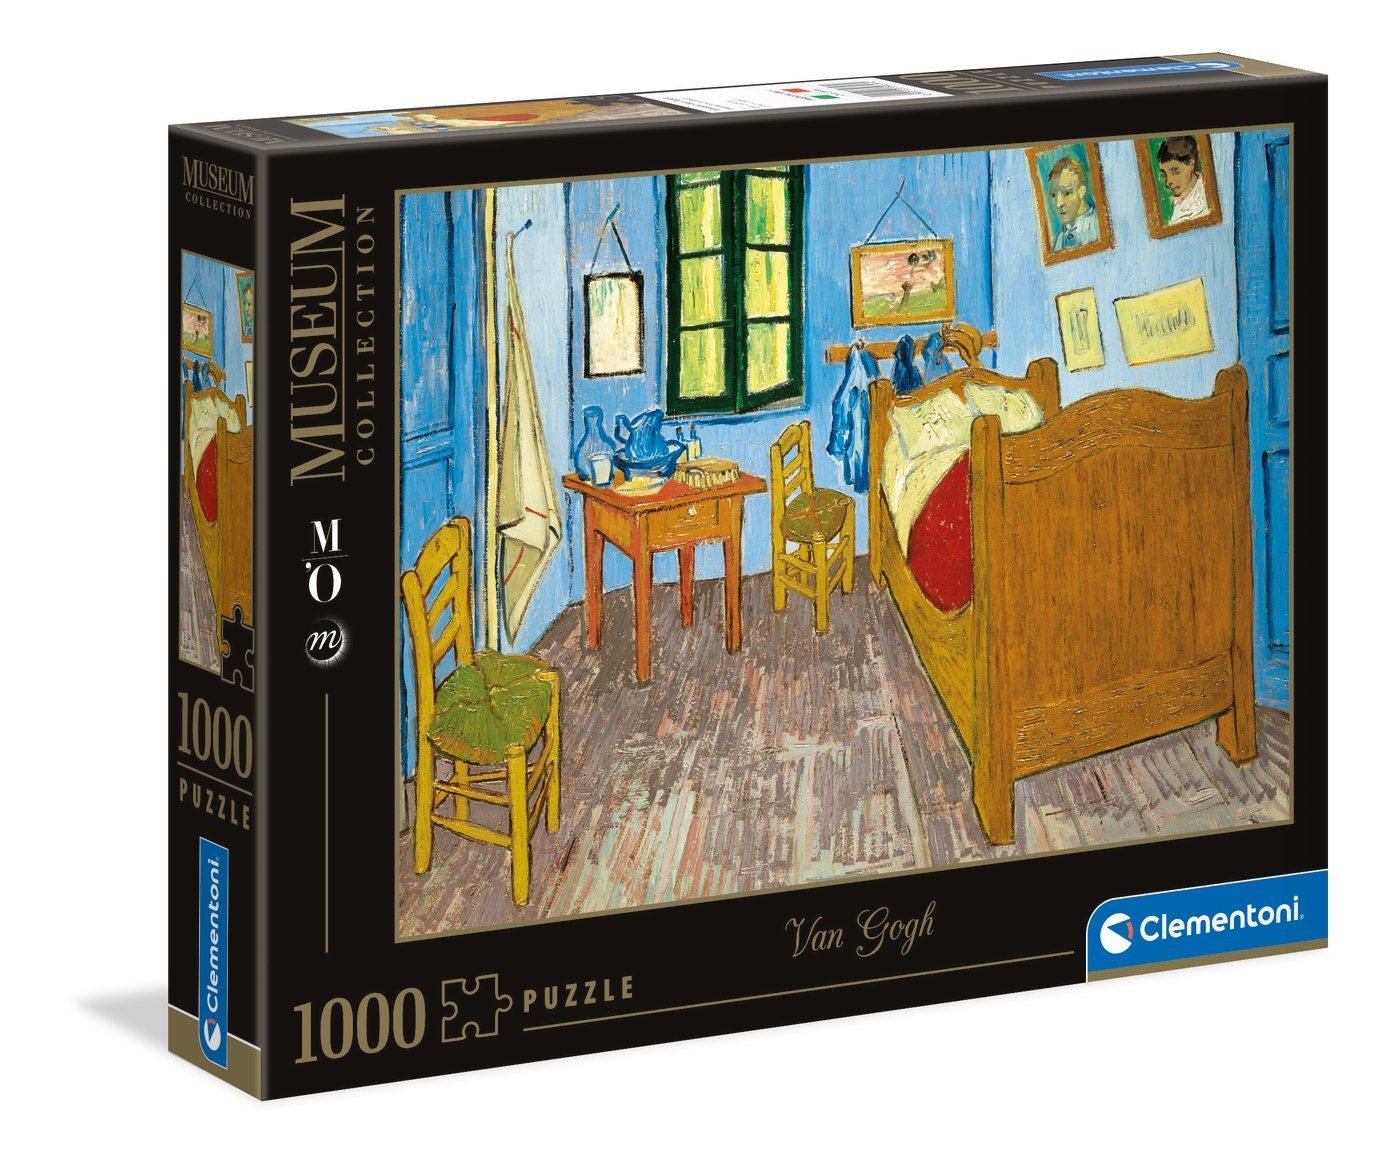 Clementoni® Puzzle Museum Collection 1000 Van in Schlafzimmer Puzzleteile Gogh Arles